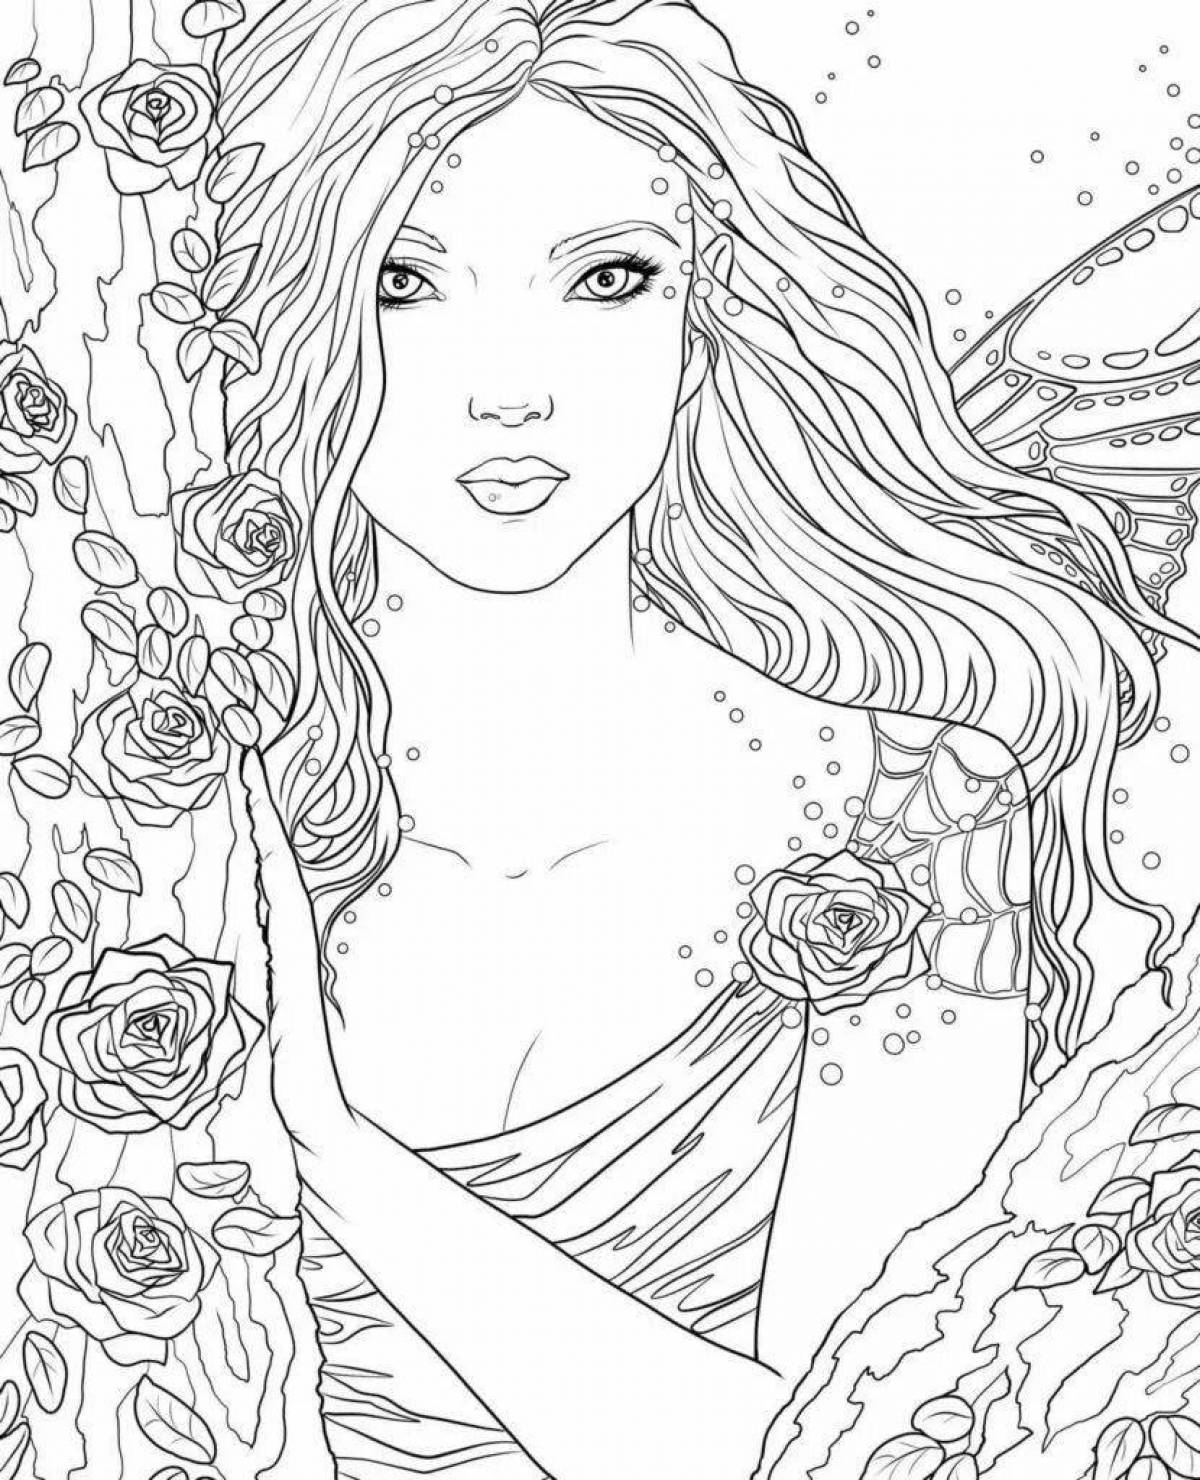 Amazing coloring book for 18 year old girls